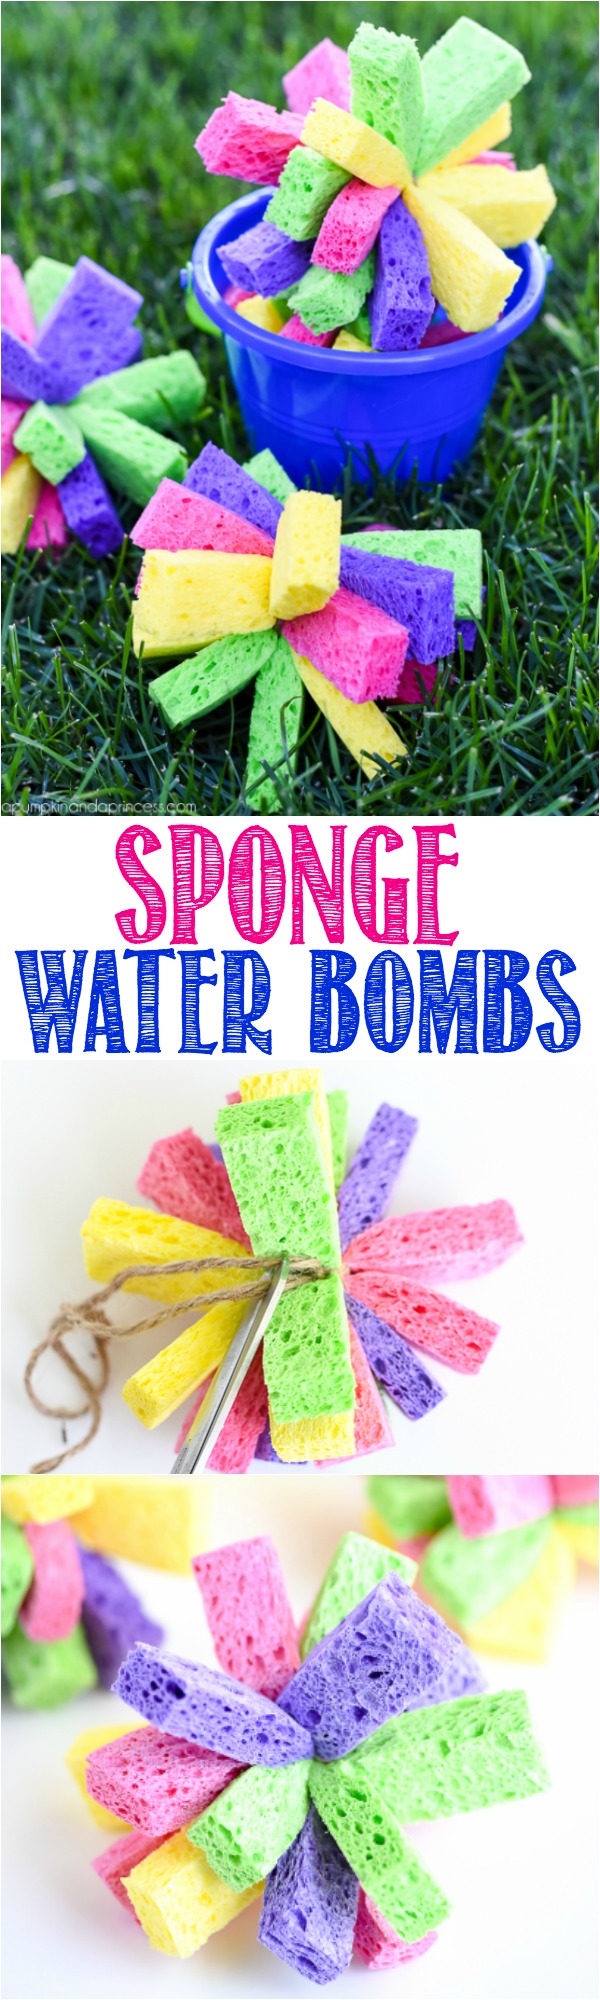 How to make sponge bombs – beat summer boredom with this easy DIY water activity. Kids will love soaking and tossing the colorful sponge bombs for hours!